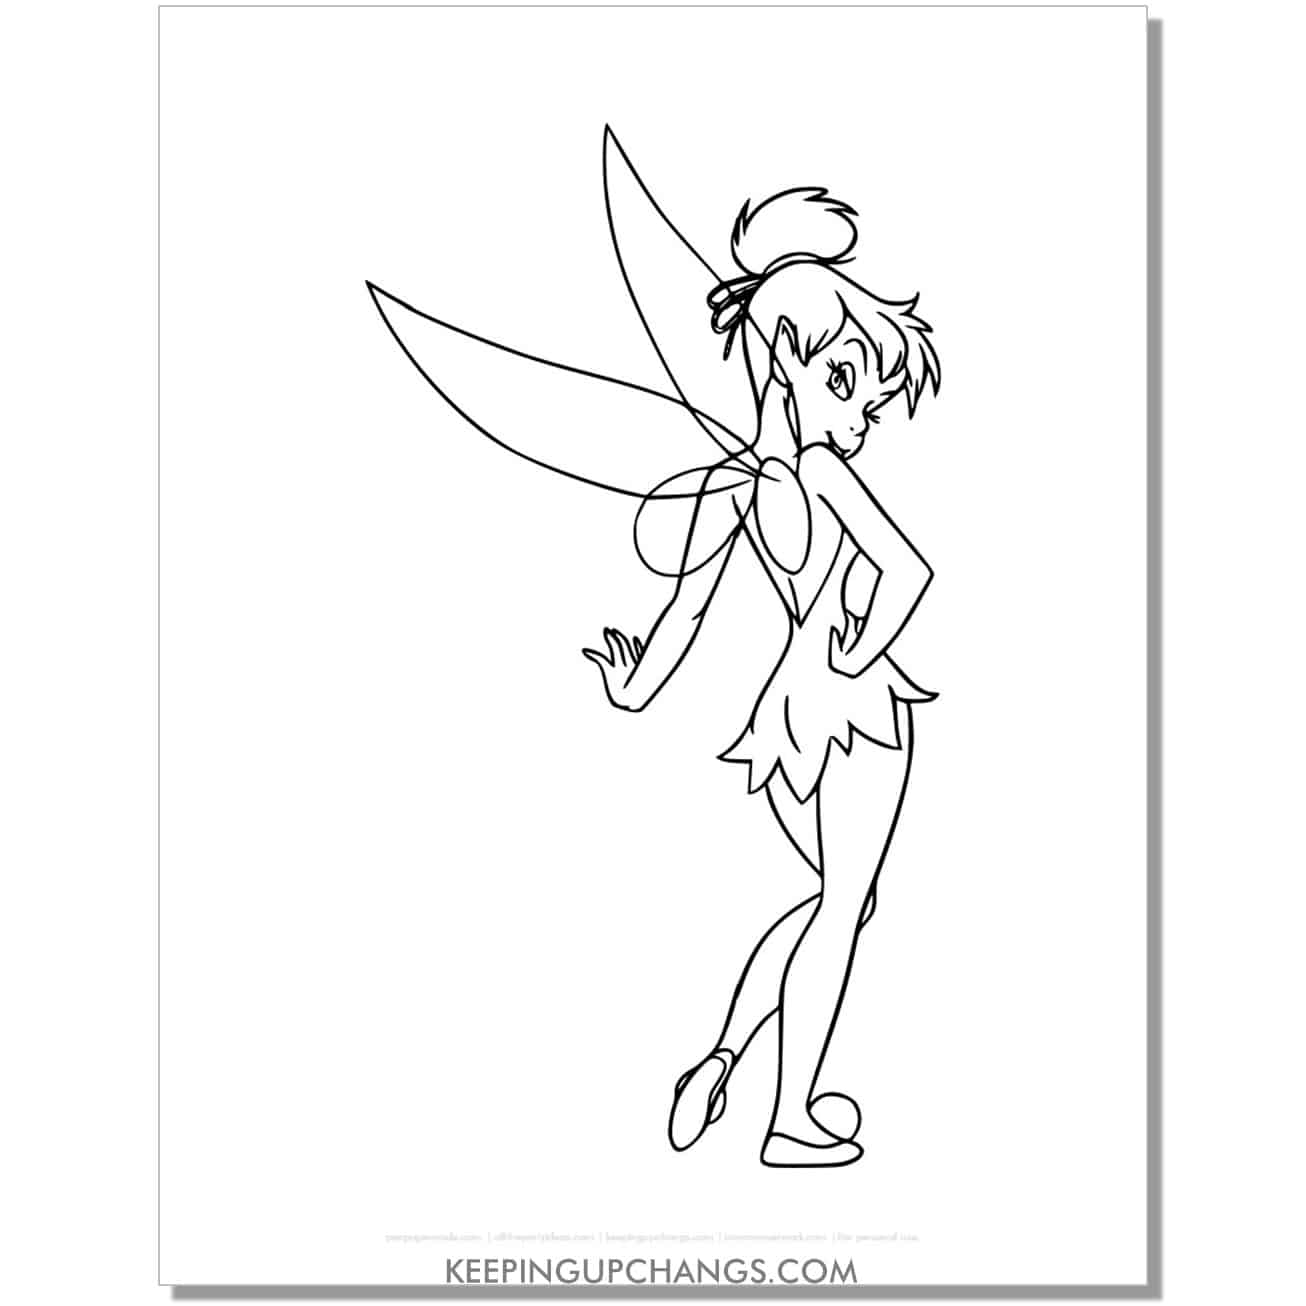 tinkerbell standing with one leg bent coloring page, sheet.